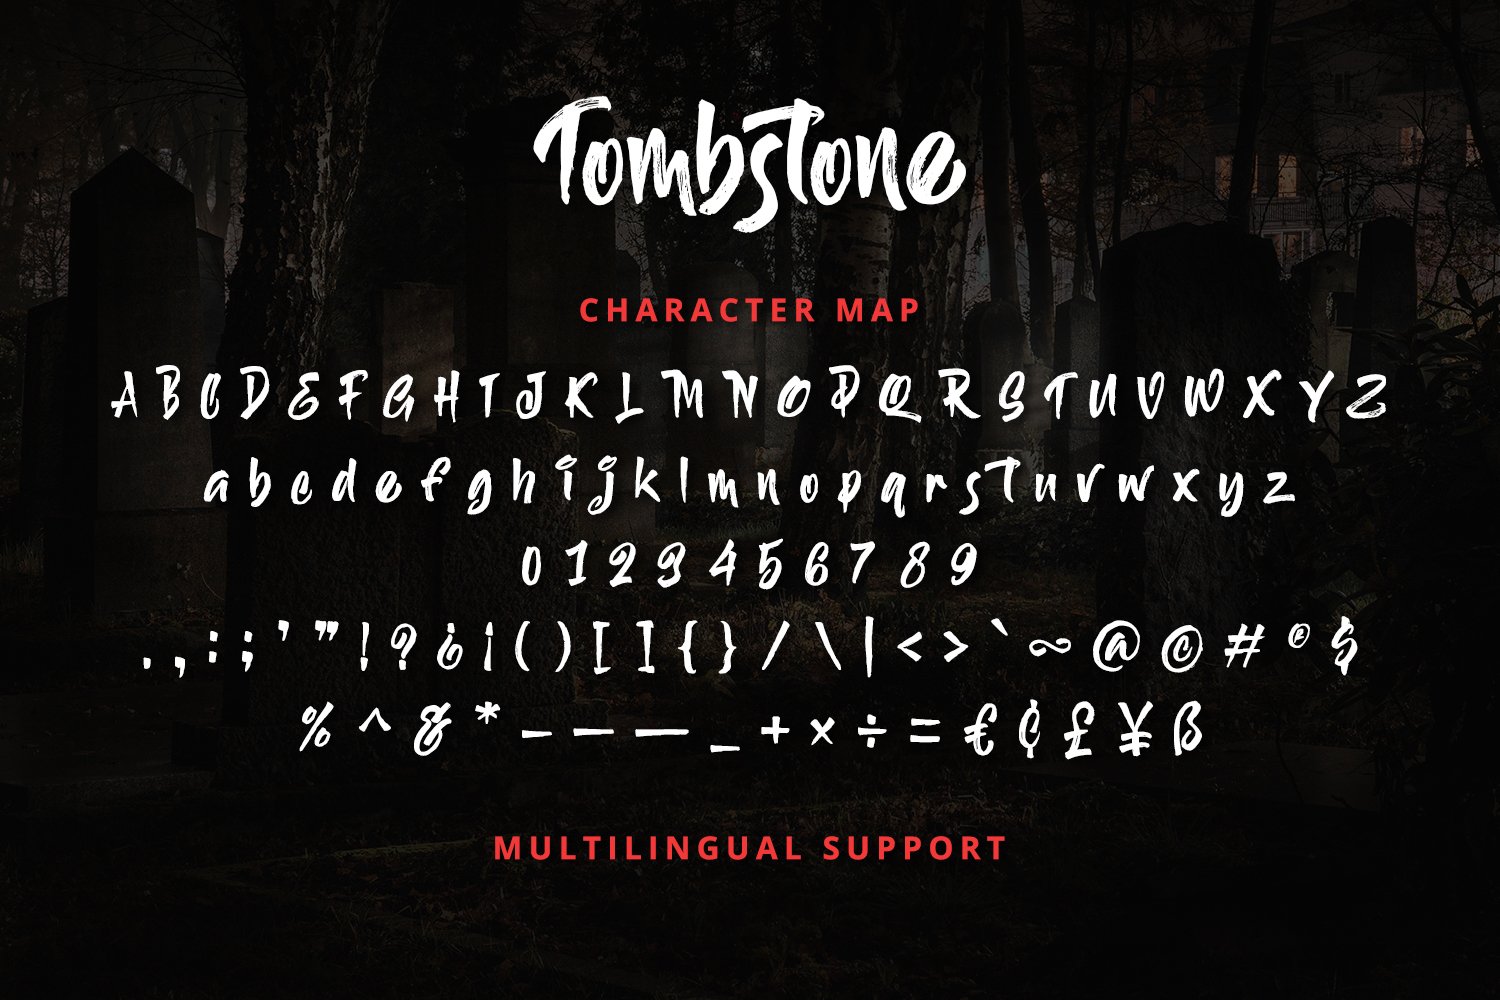 10 preview tombstone 009 315